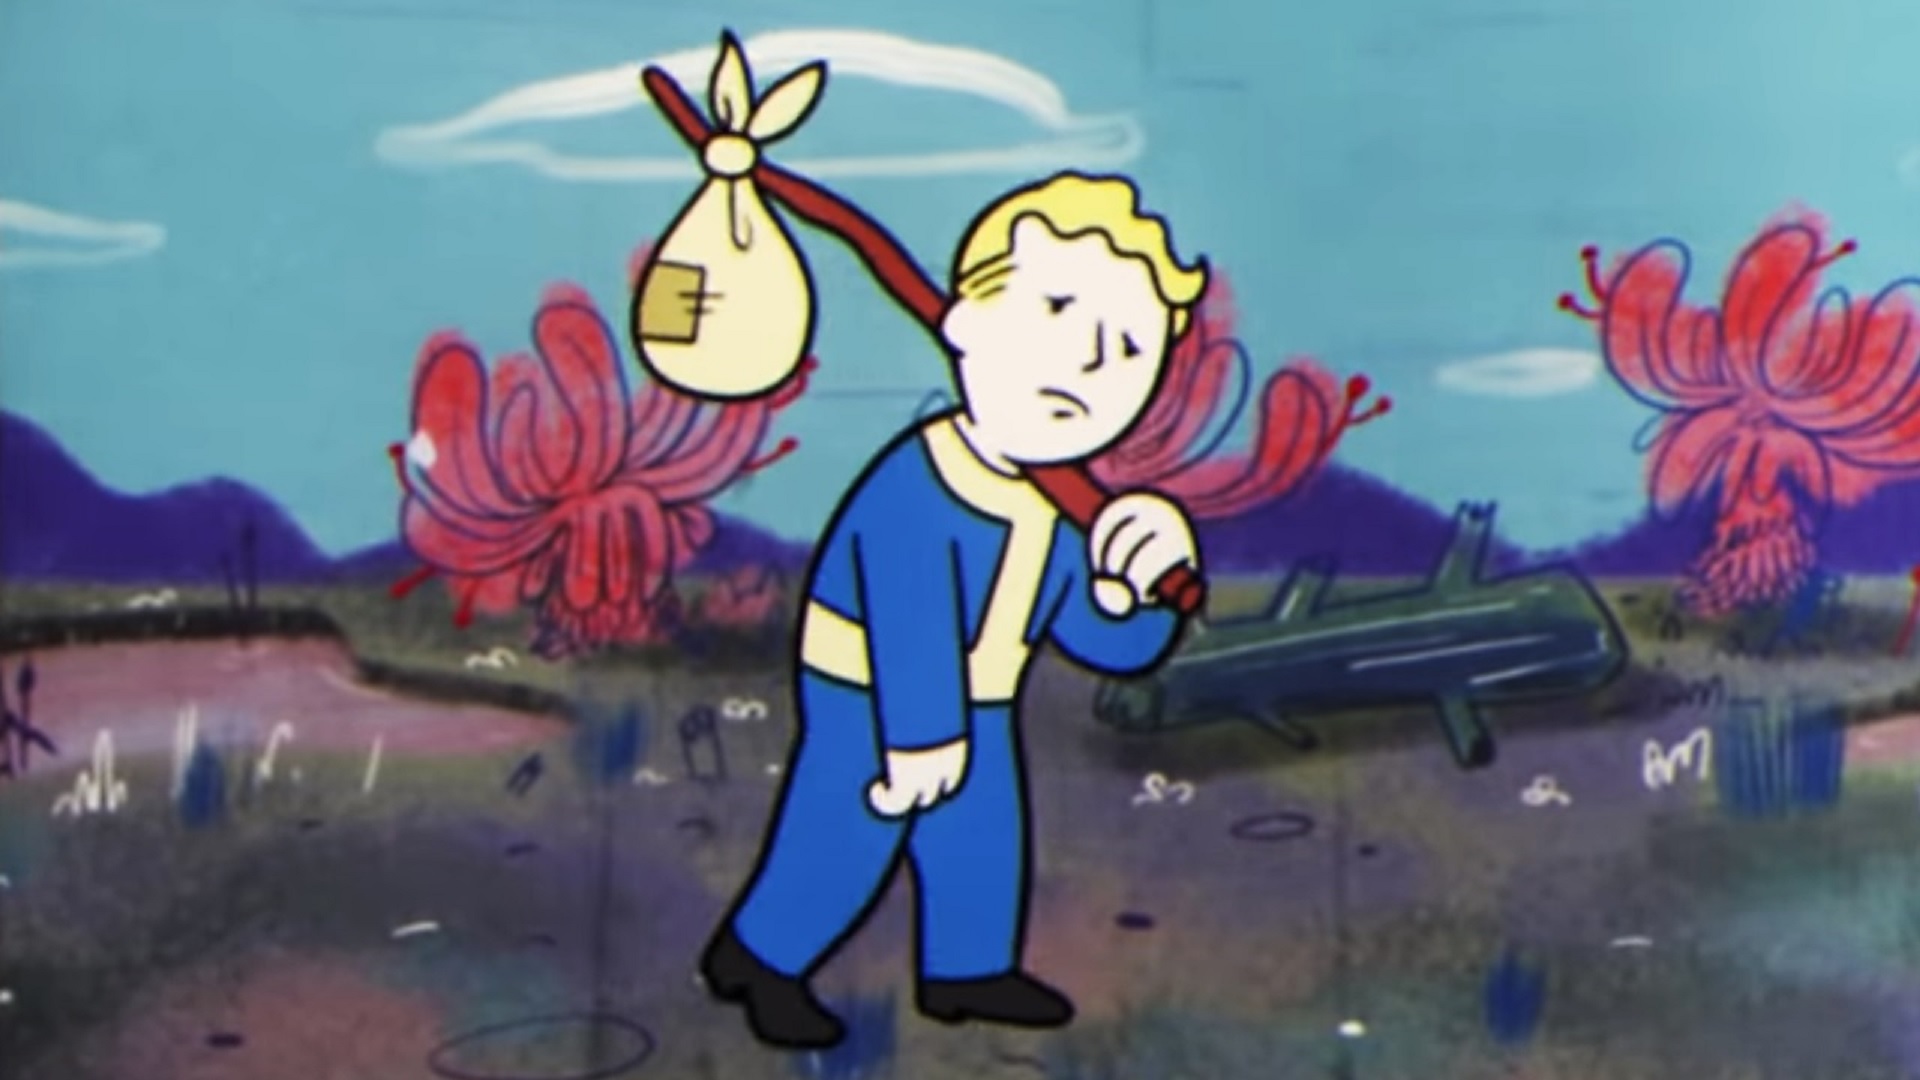 A new Fallout 76 exploit lets hackers steal your entire inventory